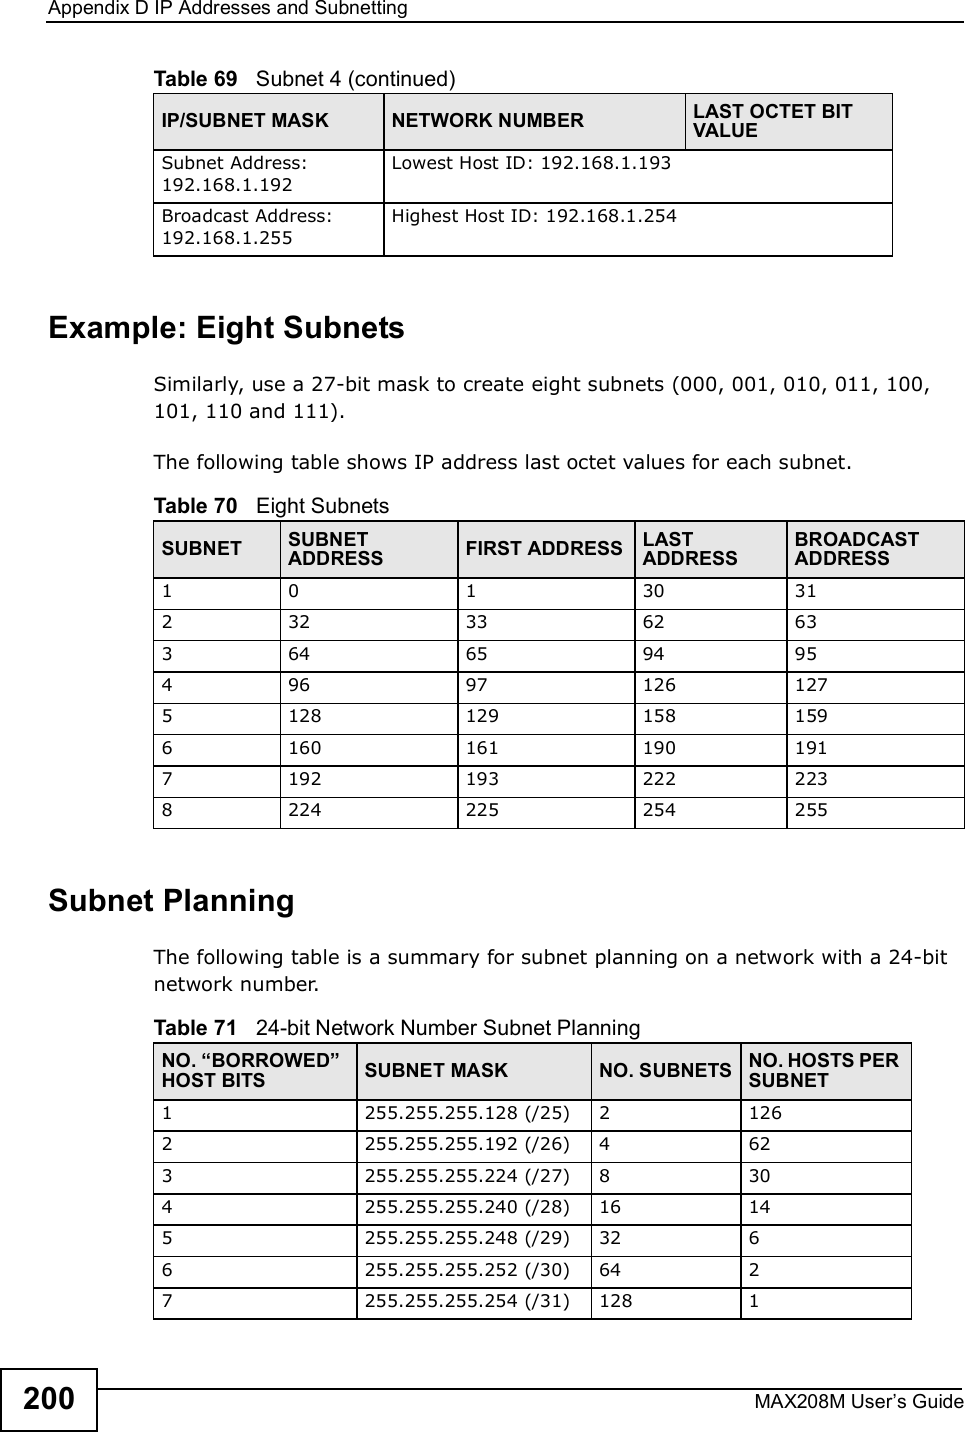 Appendix DIP Addresses and SubnettingMAX208M User s Guide200Example: Eight SubnetsSimilarly, use a 27-bit mask to create eight subnets (000, 001, 010, 011, 100, 101, 110 and 111). The following table shows IP address last octet values for each subnet.Subnet PlanningThe following table is a summary for subnet planning on a network with a 24-bit network number.Subnet Address: 192.168.1.192Lowest Host ID: 192.168.1.193Broadcast Address: 192.168.1.255Highest Host ID: 192.168.1.254Table 69   Subnet 4 (continued)IP/SUBNET MASK NETWORK NUMBER LAST OCTET BIT VALUETable 70   Eight SubnetsSUBNET SUBNET ADDRESS FIRST ADDRESS LAST ADDRESSBROADCAST ADDRESS1 0 1 30 31232 33 62 63364 65 94 95496 97 126 1275 128 129 158 1596 160 161 190 1917 192 193 222 2238 224 225 254 255Table 71   24-bit Network Number Subnet PlanningNO. #BORROWED$ HOST BITS SUBNET MASK NO. SUBNETS NO. HOSTS PER SUBNET1255.255.255.128 (/25) 2 1262255.255.255.192 (/26) 4 623 255.255.255.224 (/27) 8 304 255.255.255.240 (/28) 16 145 255.255.255.248 (/29) 32 66 255.255.255.252 (/30) 64 27 255.255.255.254 (/31) 128 1